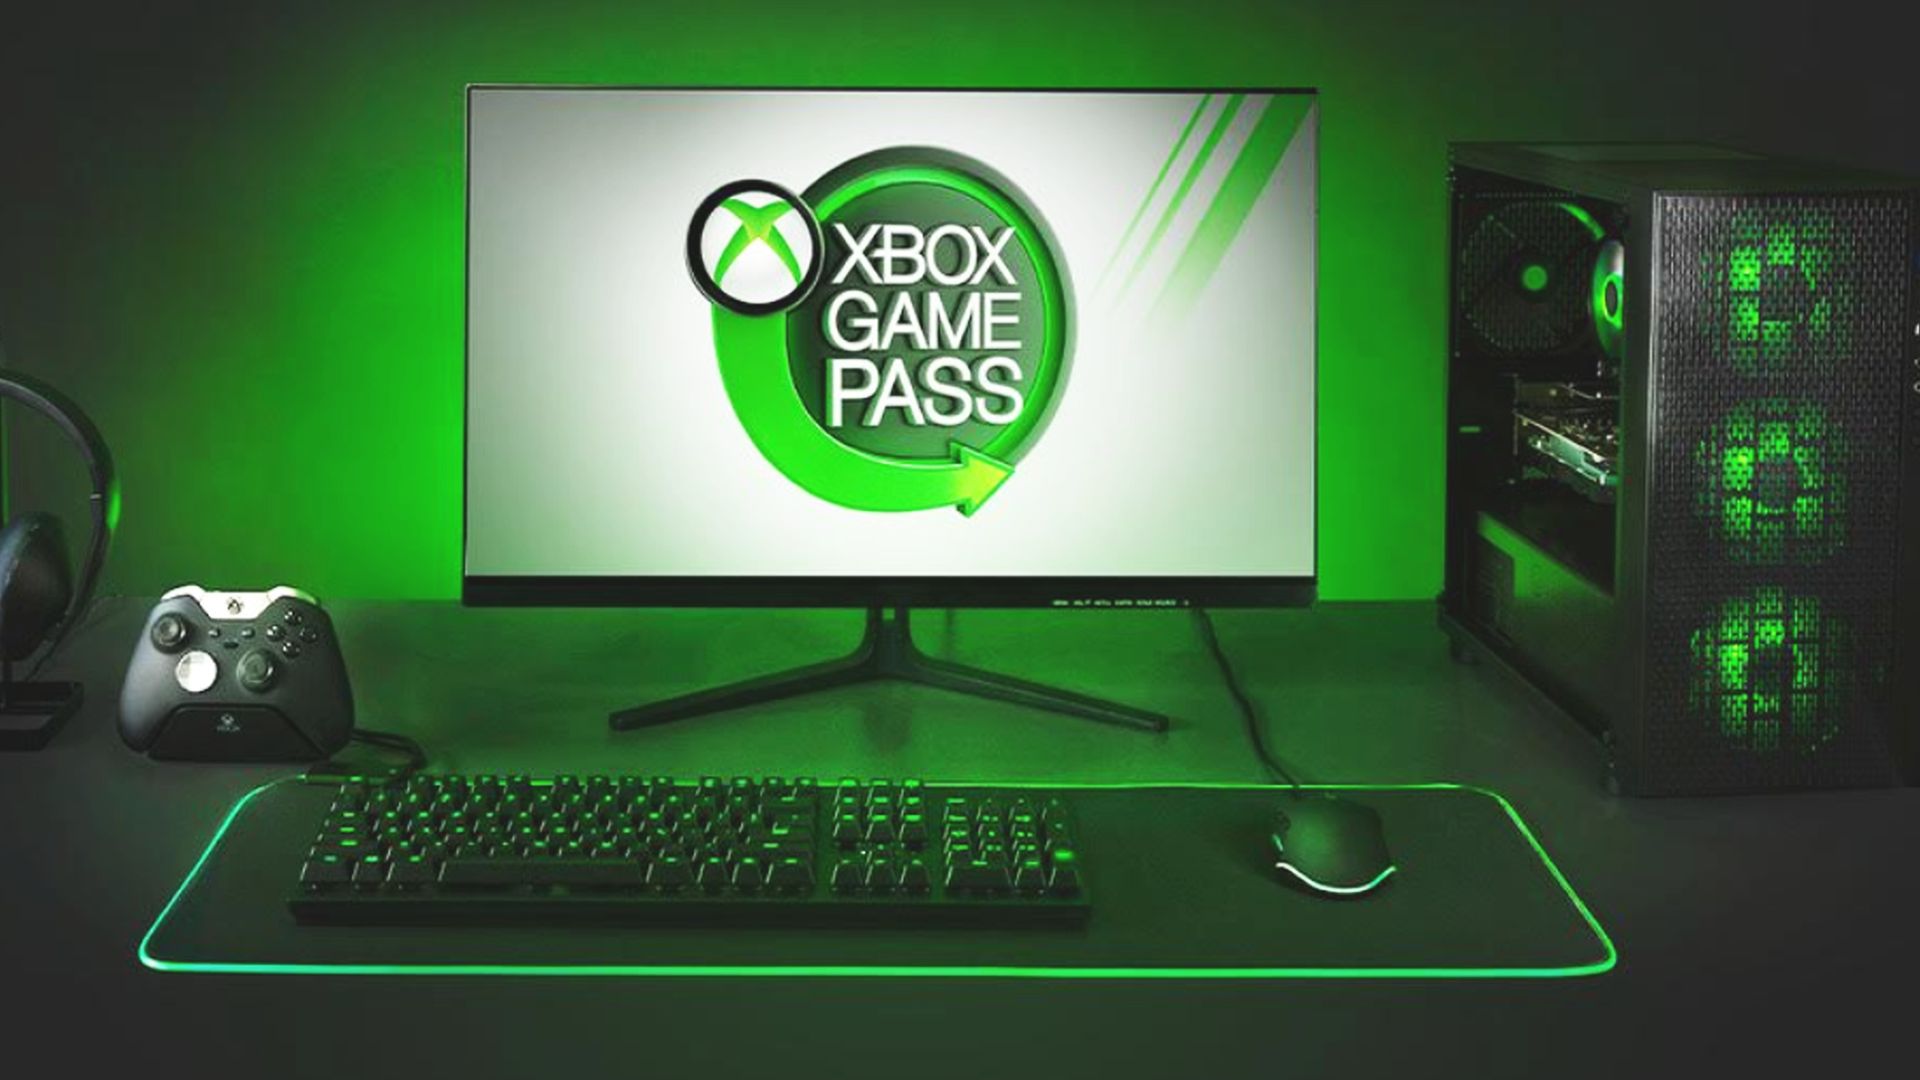 diamant Gastvrijheid metgezel How to transfer your Xbox Game Pass PC saves to Steam | PCGamesN